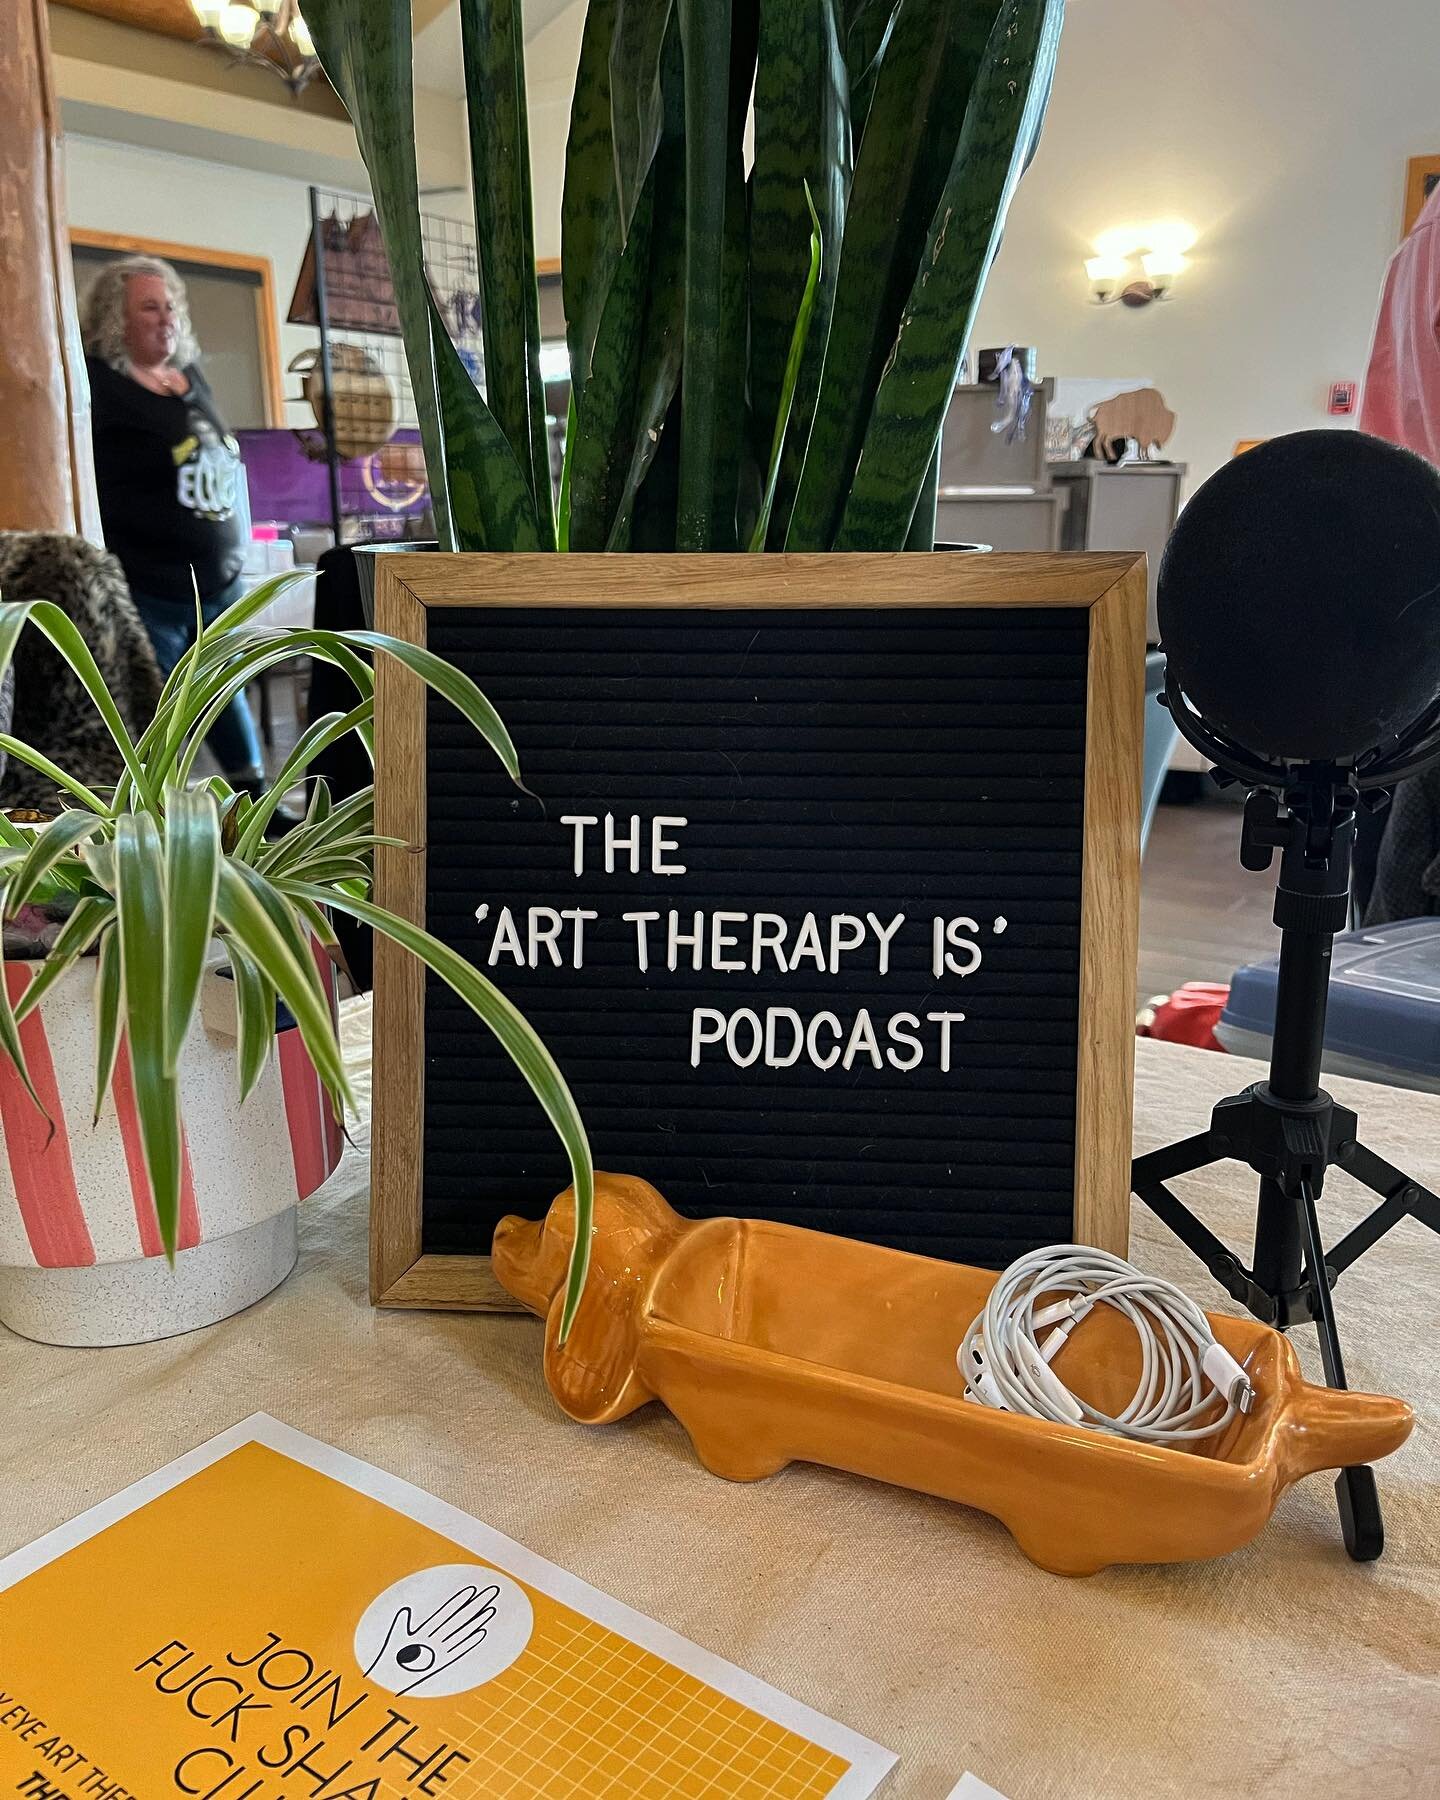 Did you know that Belly Eye has a Podcast?!
.
The Art Therapy Is Podcast
🎙️🎧🪩
.
@arttherapy.is 
.
Learn what Art Therapy is
.
Explore a variety of themes for self growth
.
We walk you through Art Directives that help you process emotions
.
Receive